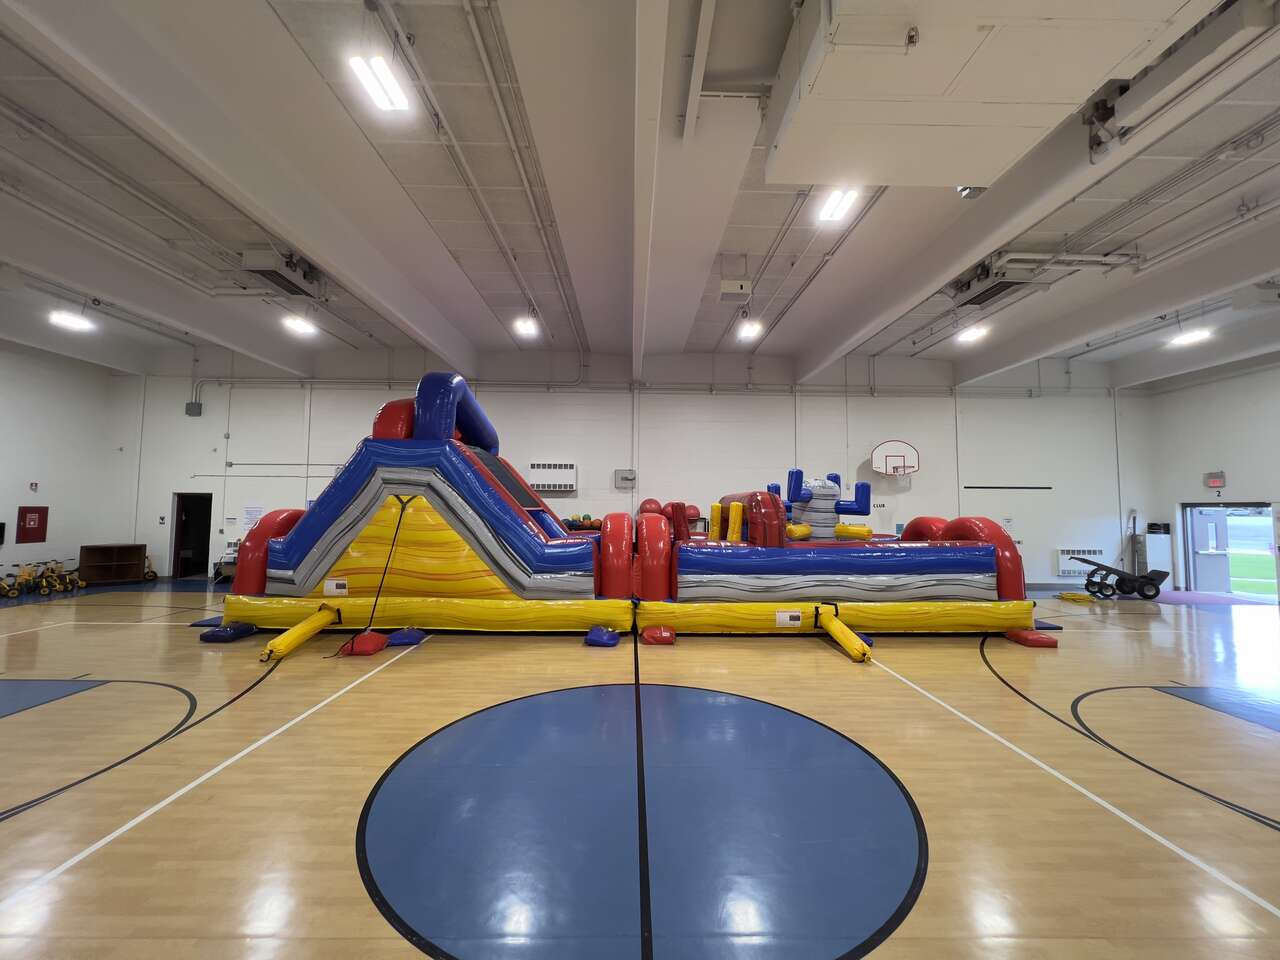 obstacle course rentals in marseilles il by Fun Bounces Rental 61341